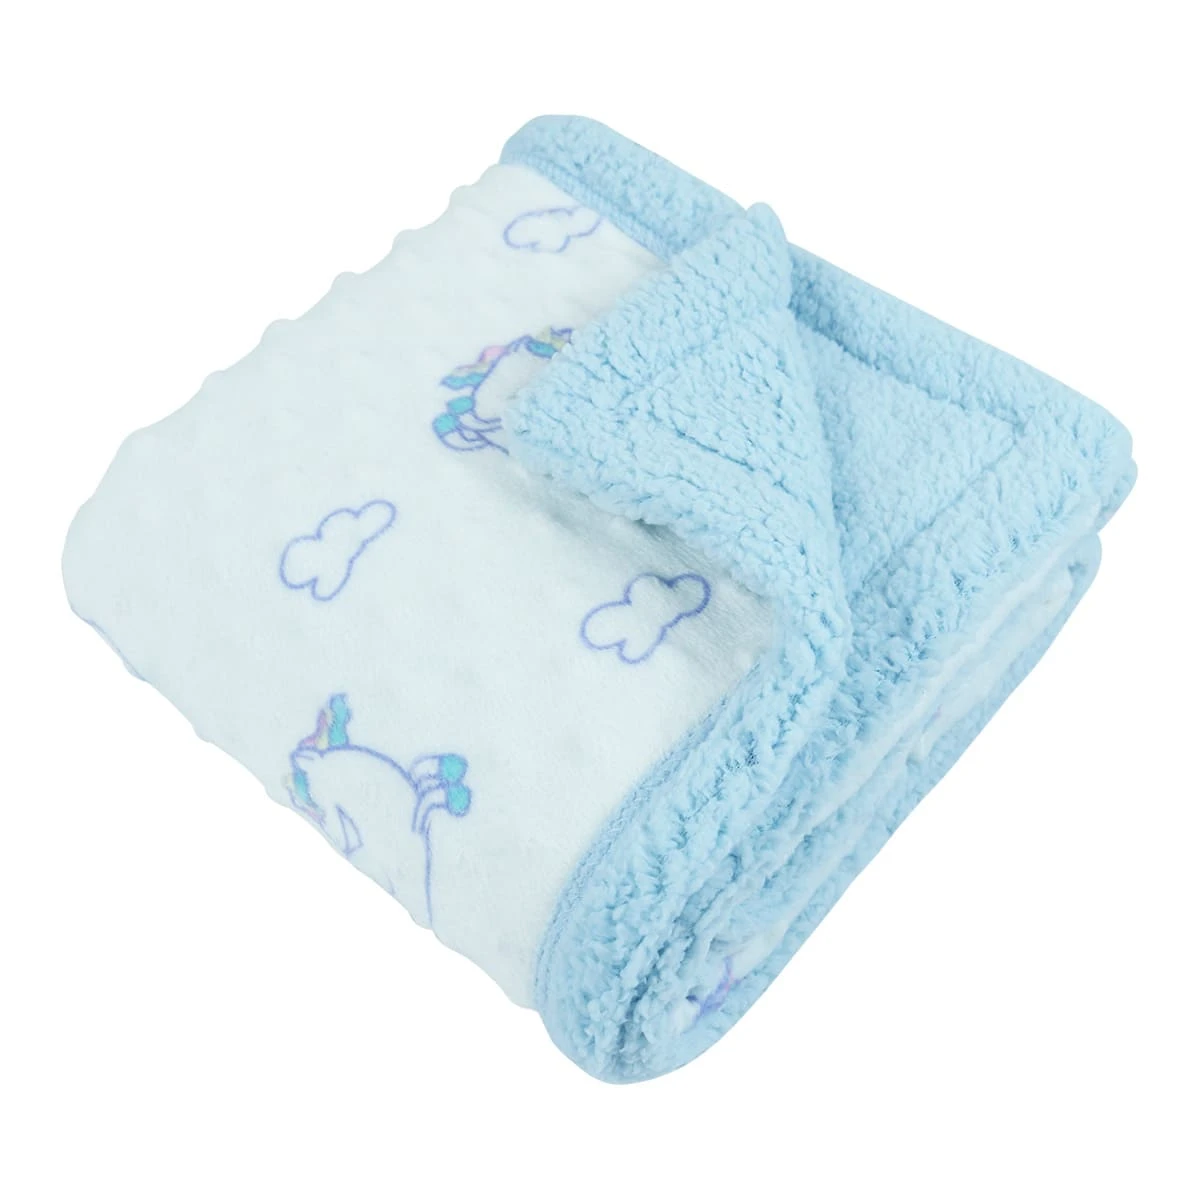 Unicorn and Cloud Printed Dimple Touch Velfleece Reversible Sherpa Baby Blanket (Blue)